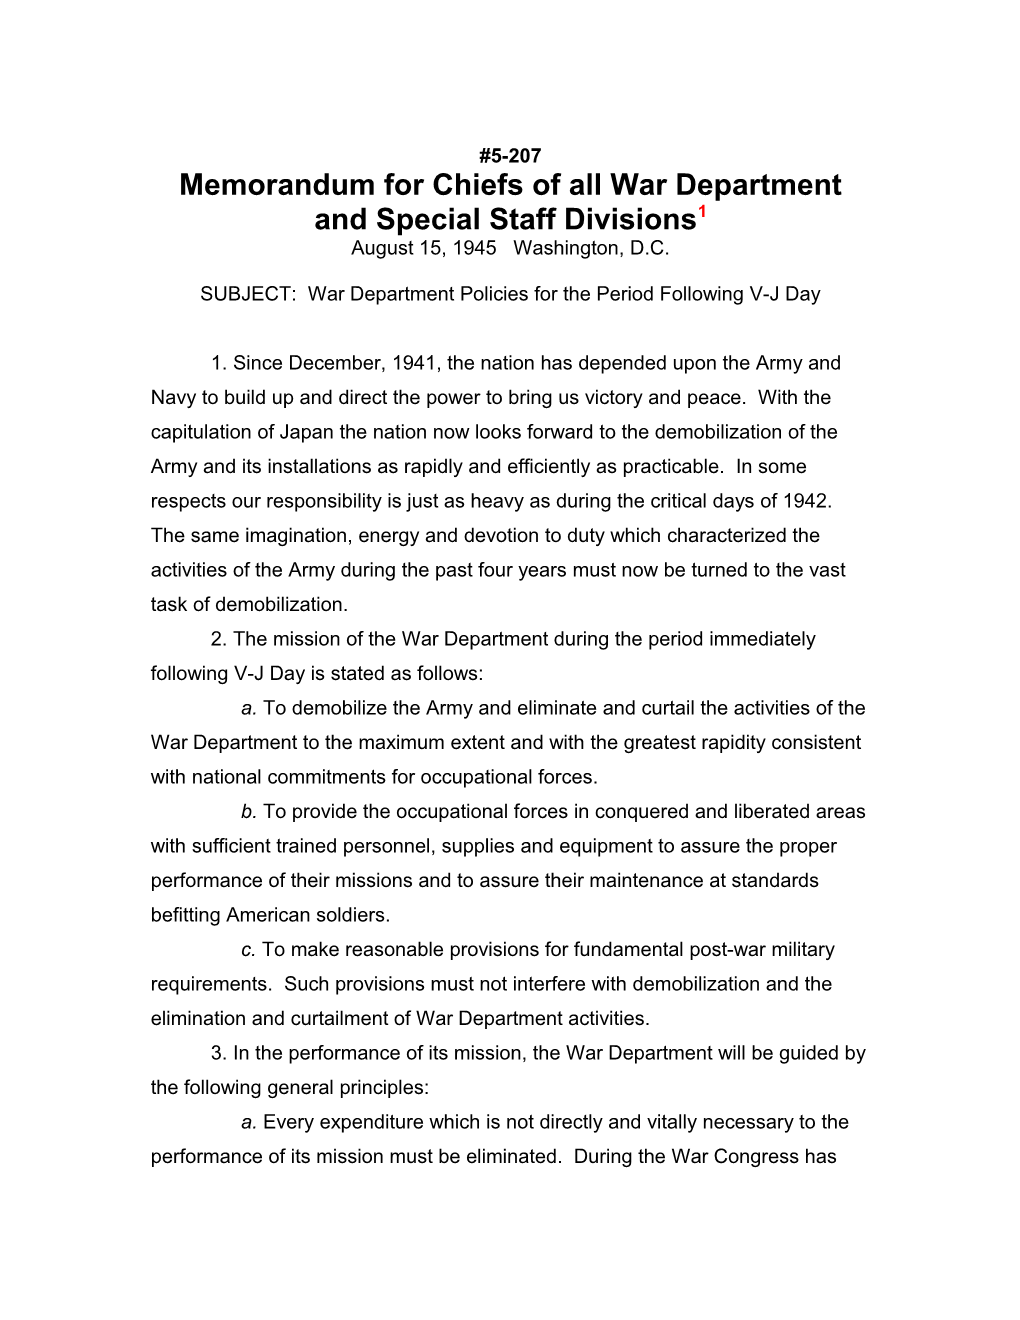 Memorandum for Chiefs of All War Department and Special Staff Divisions1